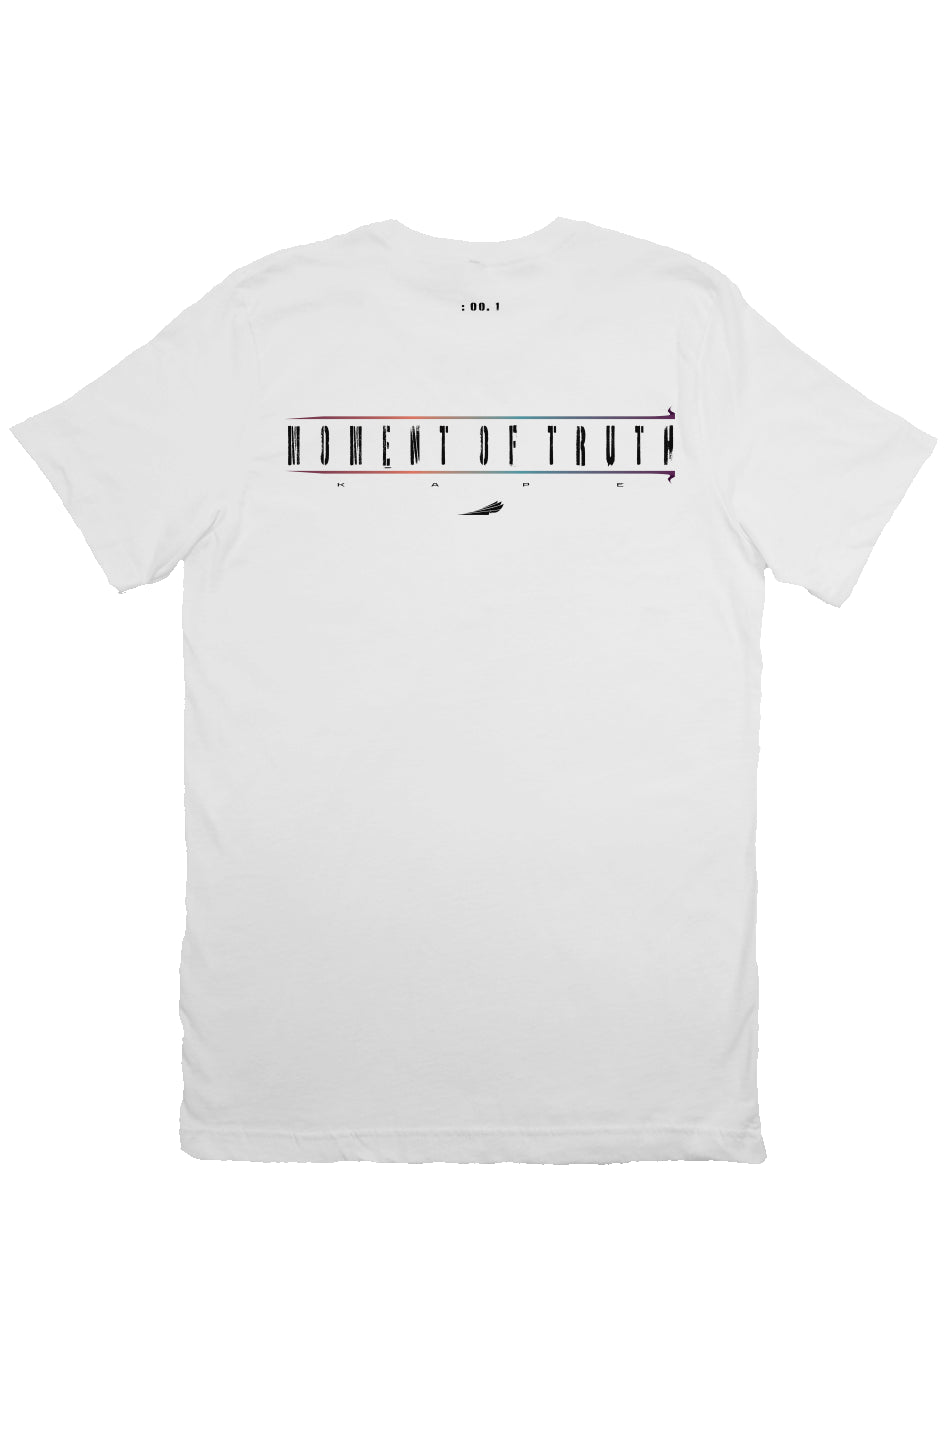 Apotheosis Series Moment of Truth White T Shirt